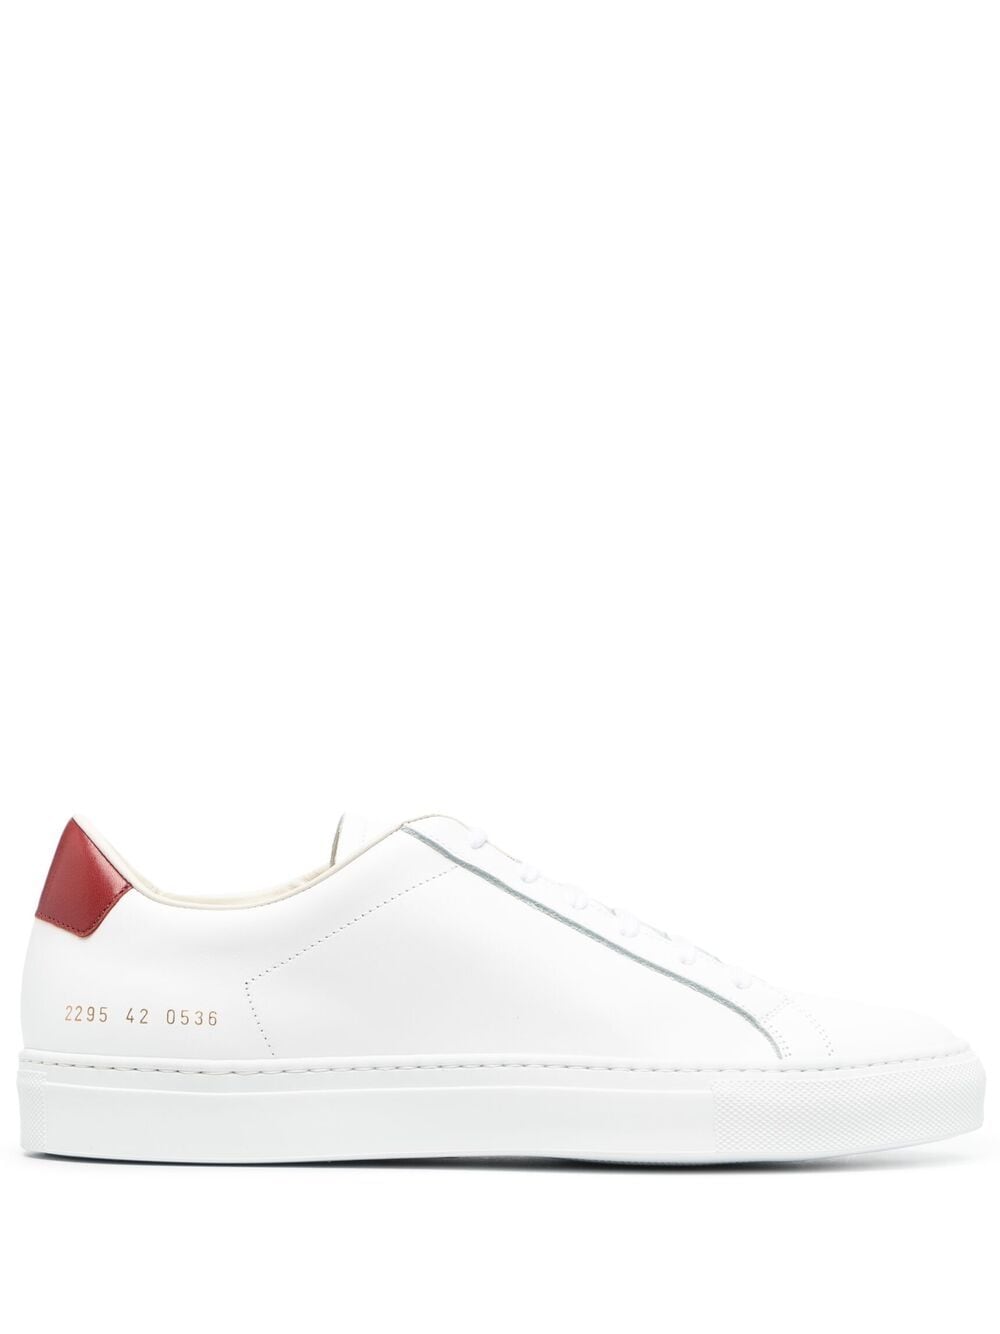 Sneaker White / Red мъжки обувки Common Projects 832239391_42